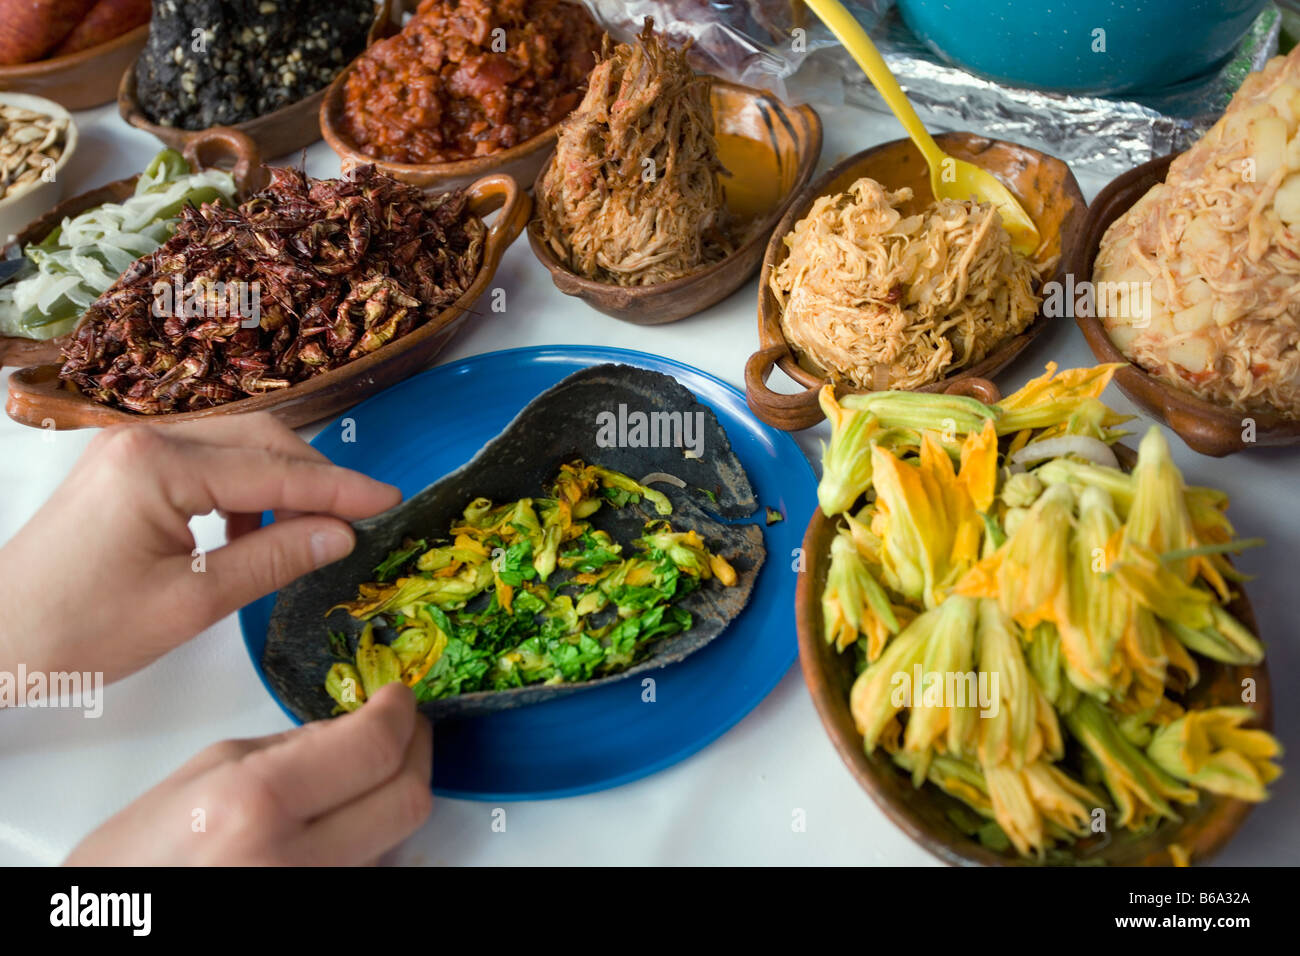 Mexico, Tepoztlan, near Cuernavaca, Market, Vegetables for tortillas. Criquets and flowers to eat Stock Photo